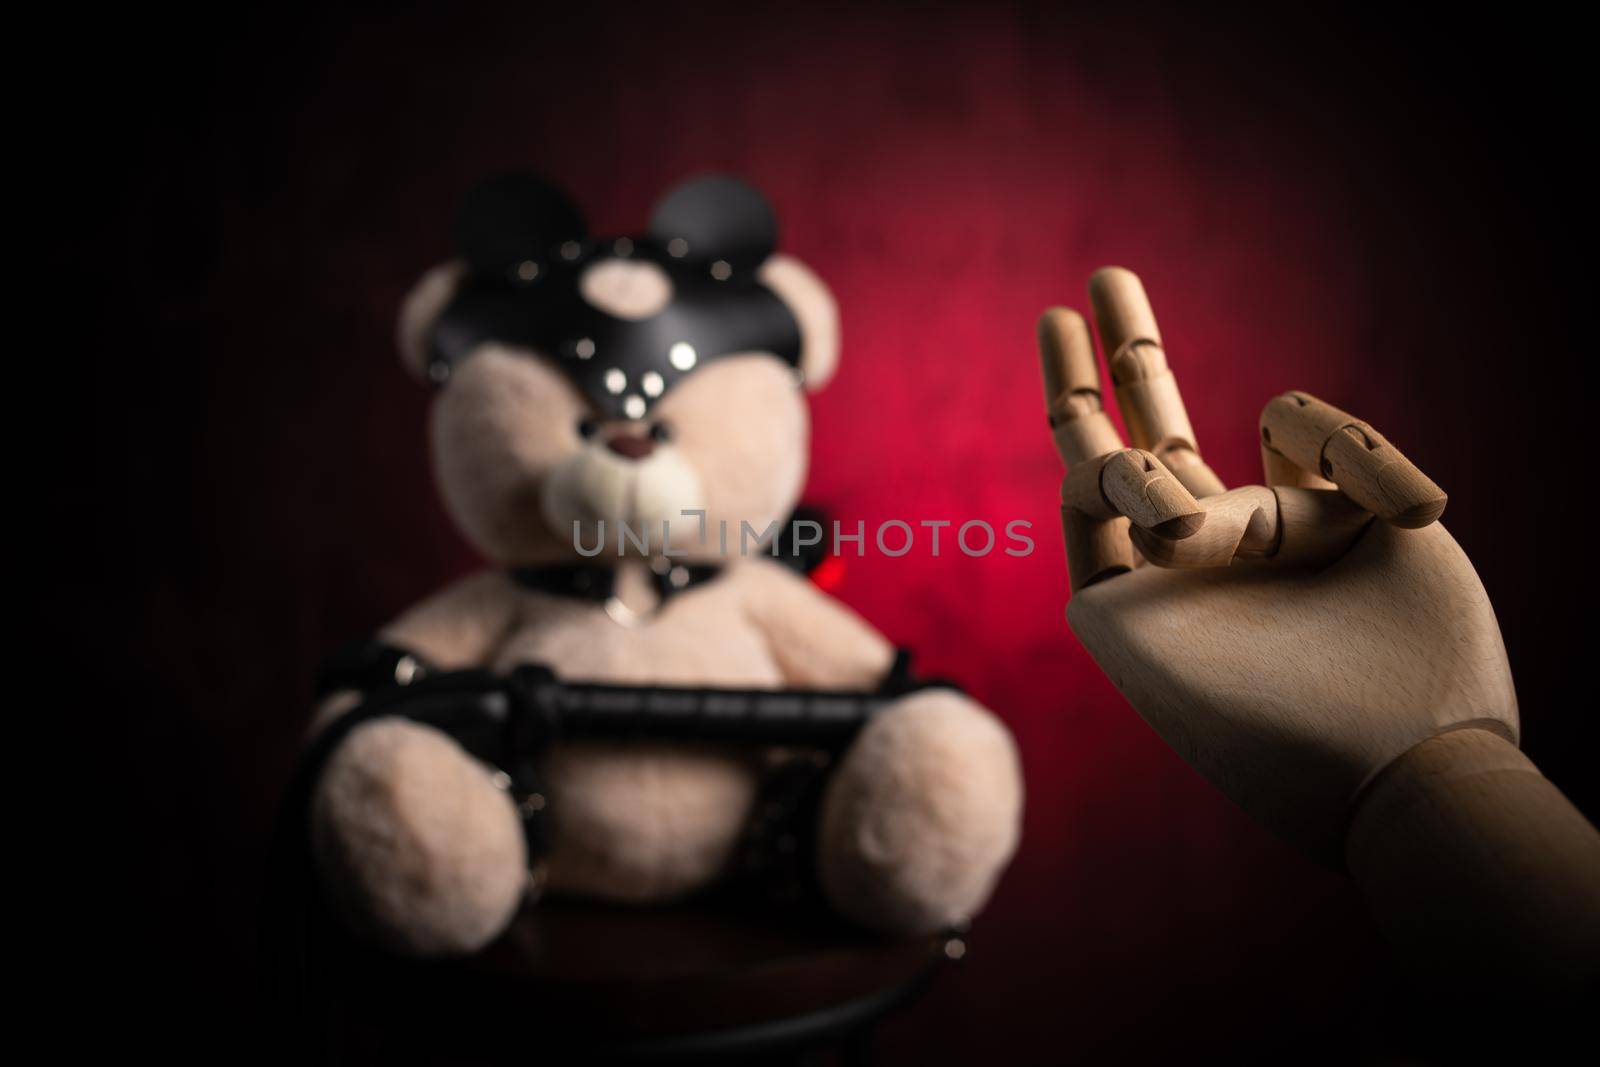 the toy teddy bear with a whip, dressed in leather belts and a mask, an accessory for BDSM games with a wooden hand and a sexual gesture